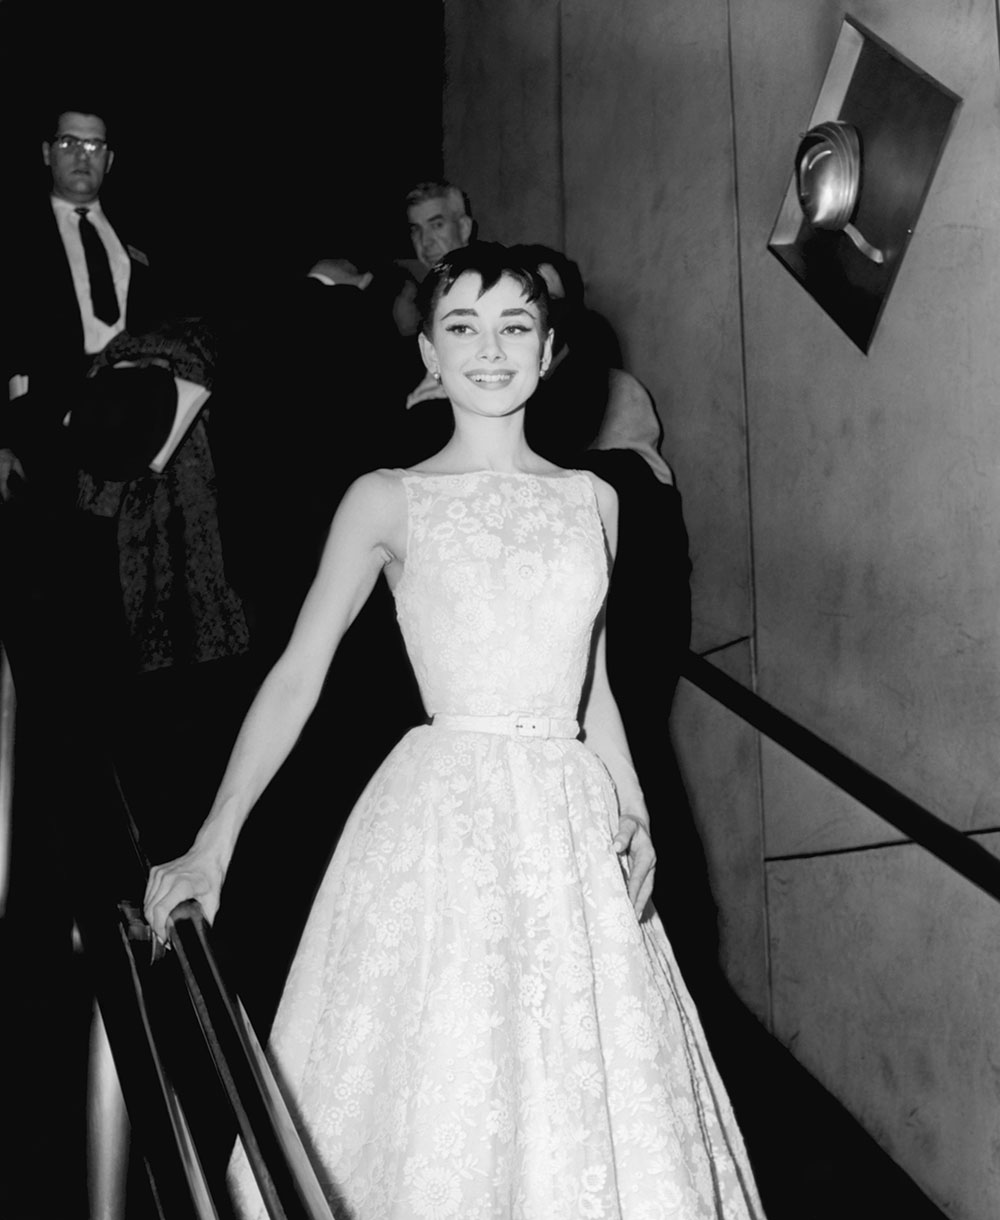 Audrey wears a Givenchy gown at the 26th Annual Academy Awards, 1954. She took home the Best Actress Oscar for Roman Holiday.